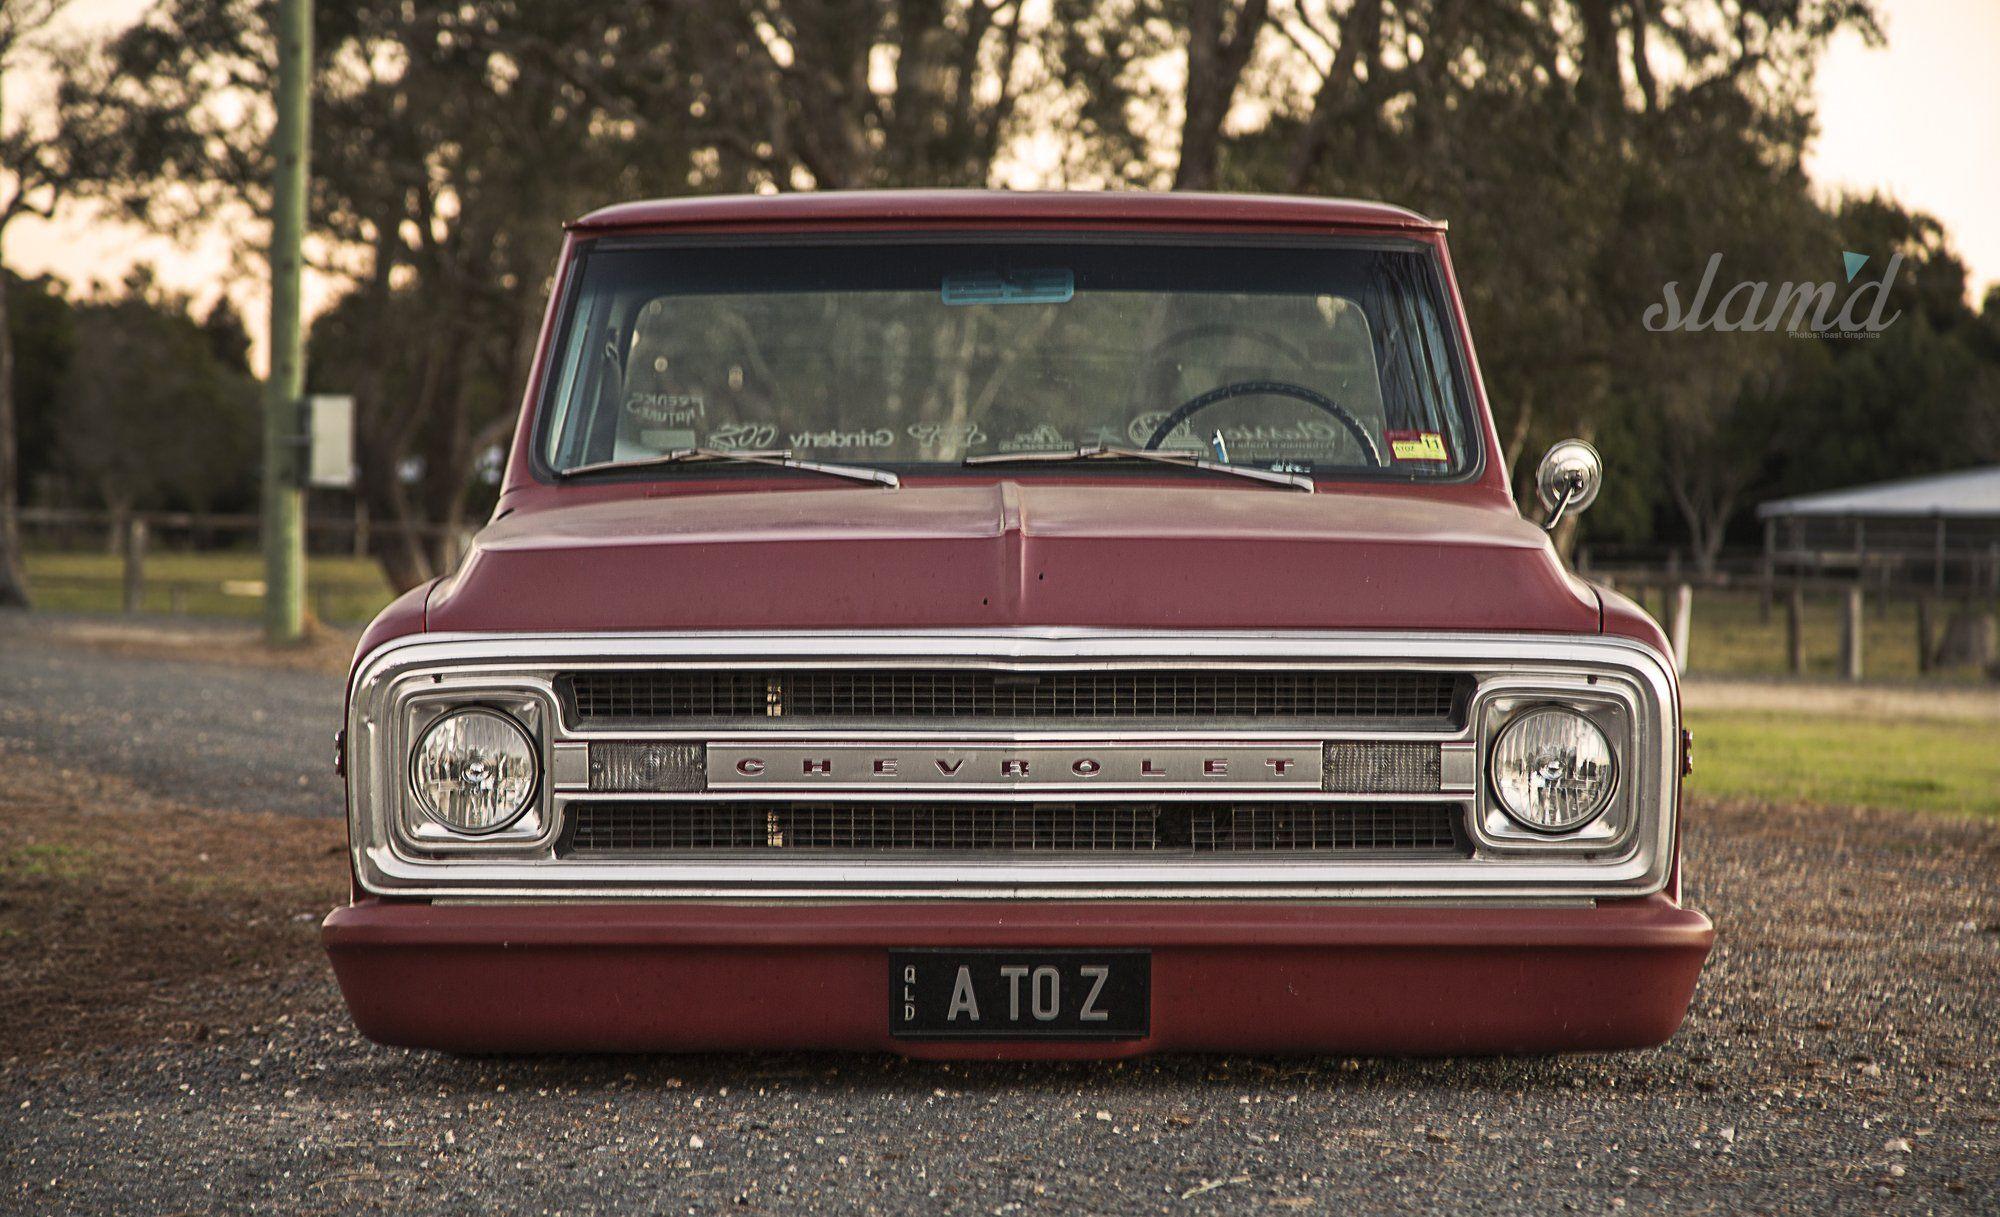 Chevy Truck Pictures  Download Free Images on Unsplash